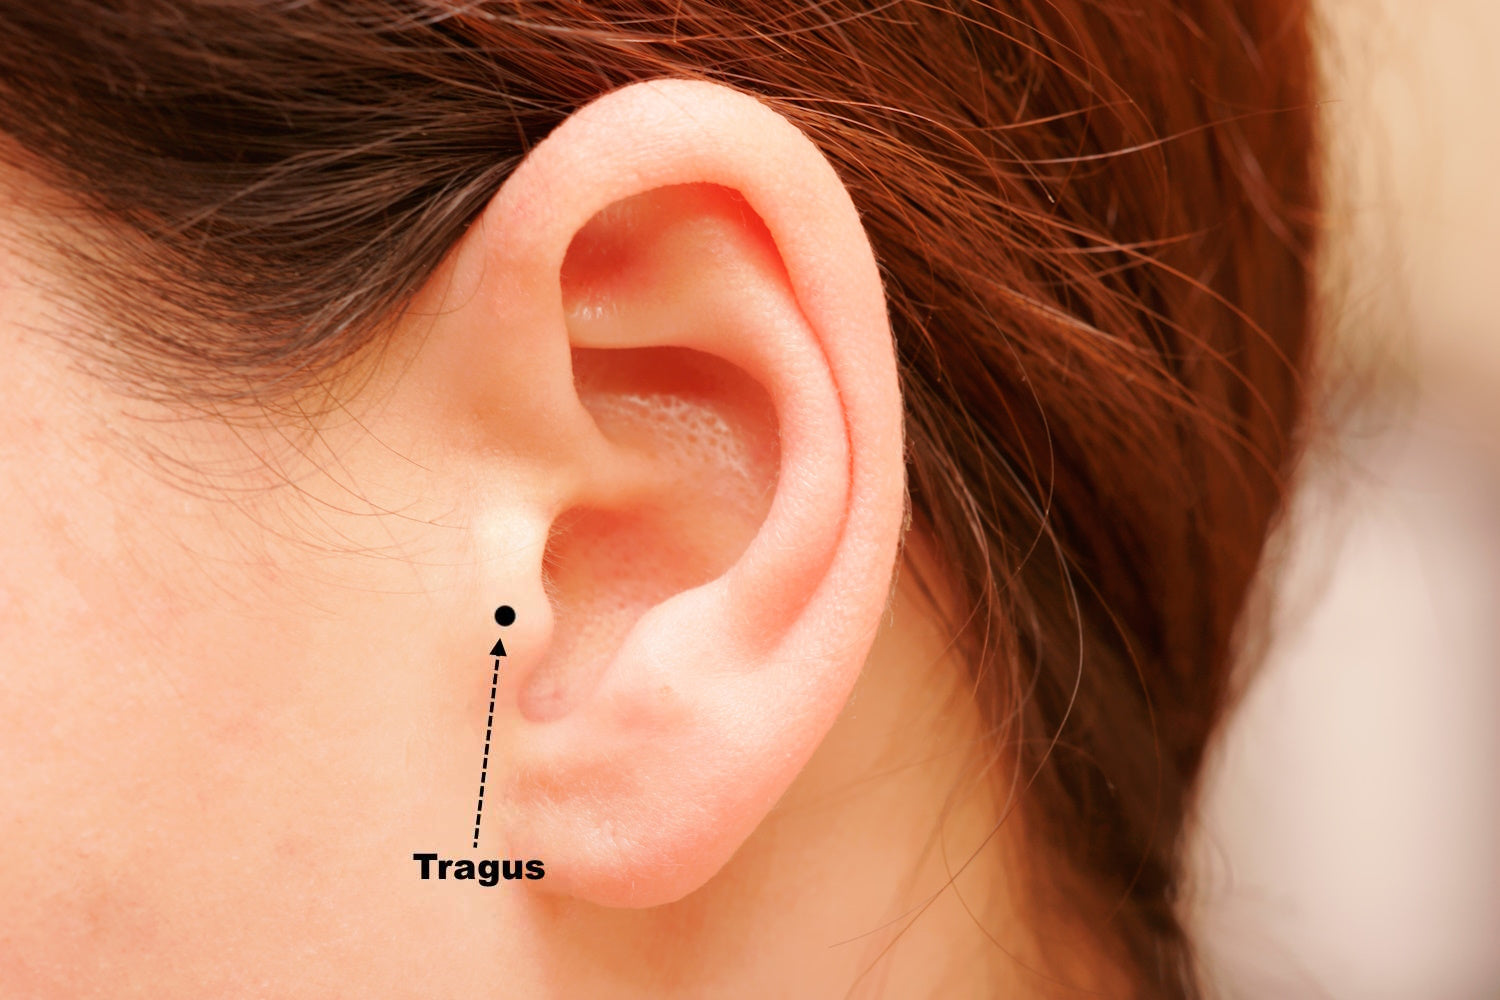 The location of the tragus piercing shown on a diagram of a woman's ear.